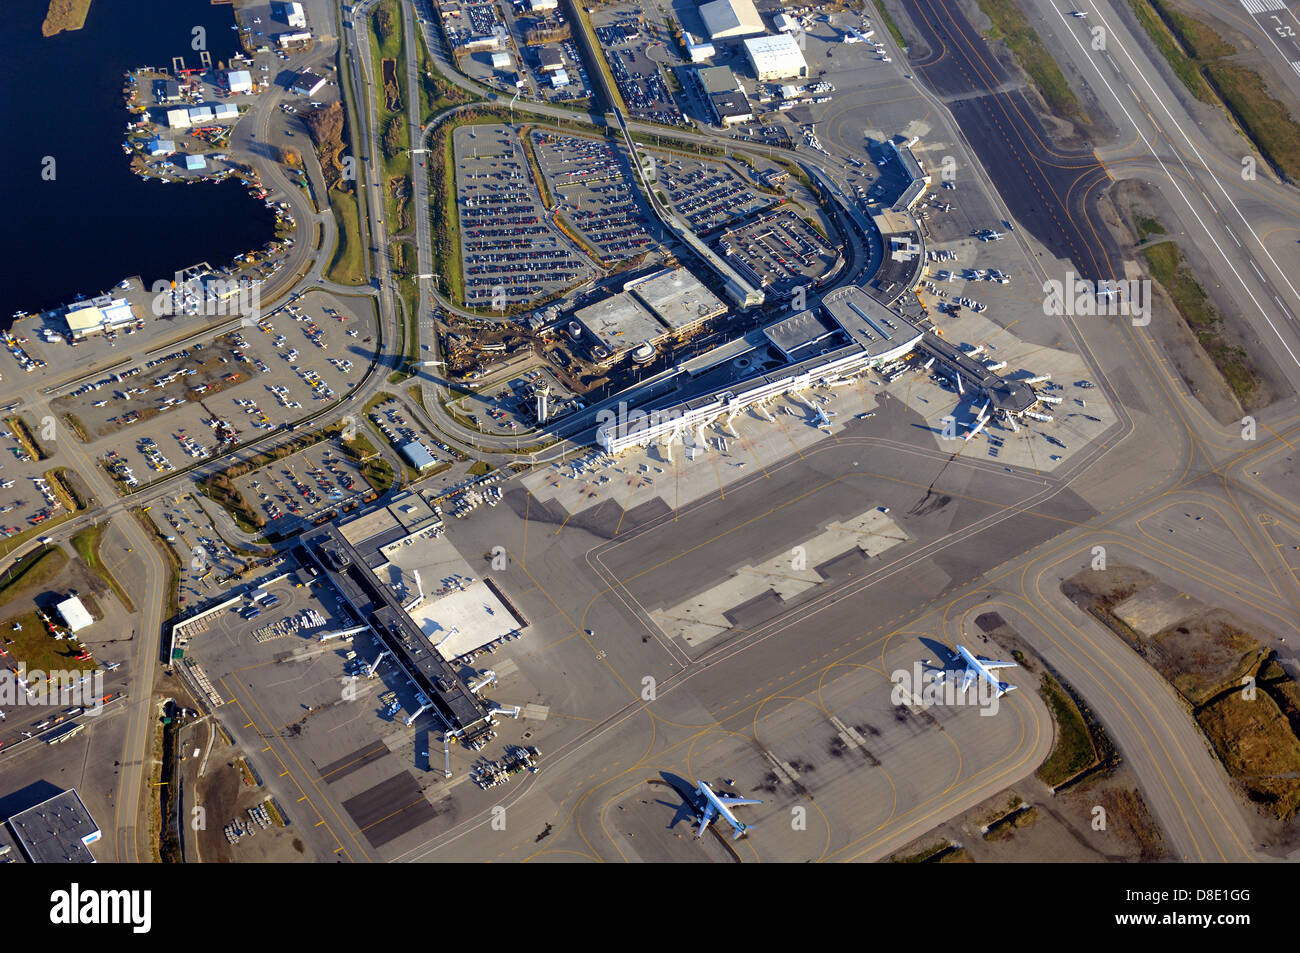 ted stevens international airport is located in which u.s. city